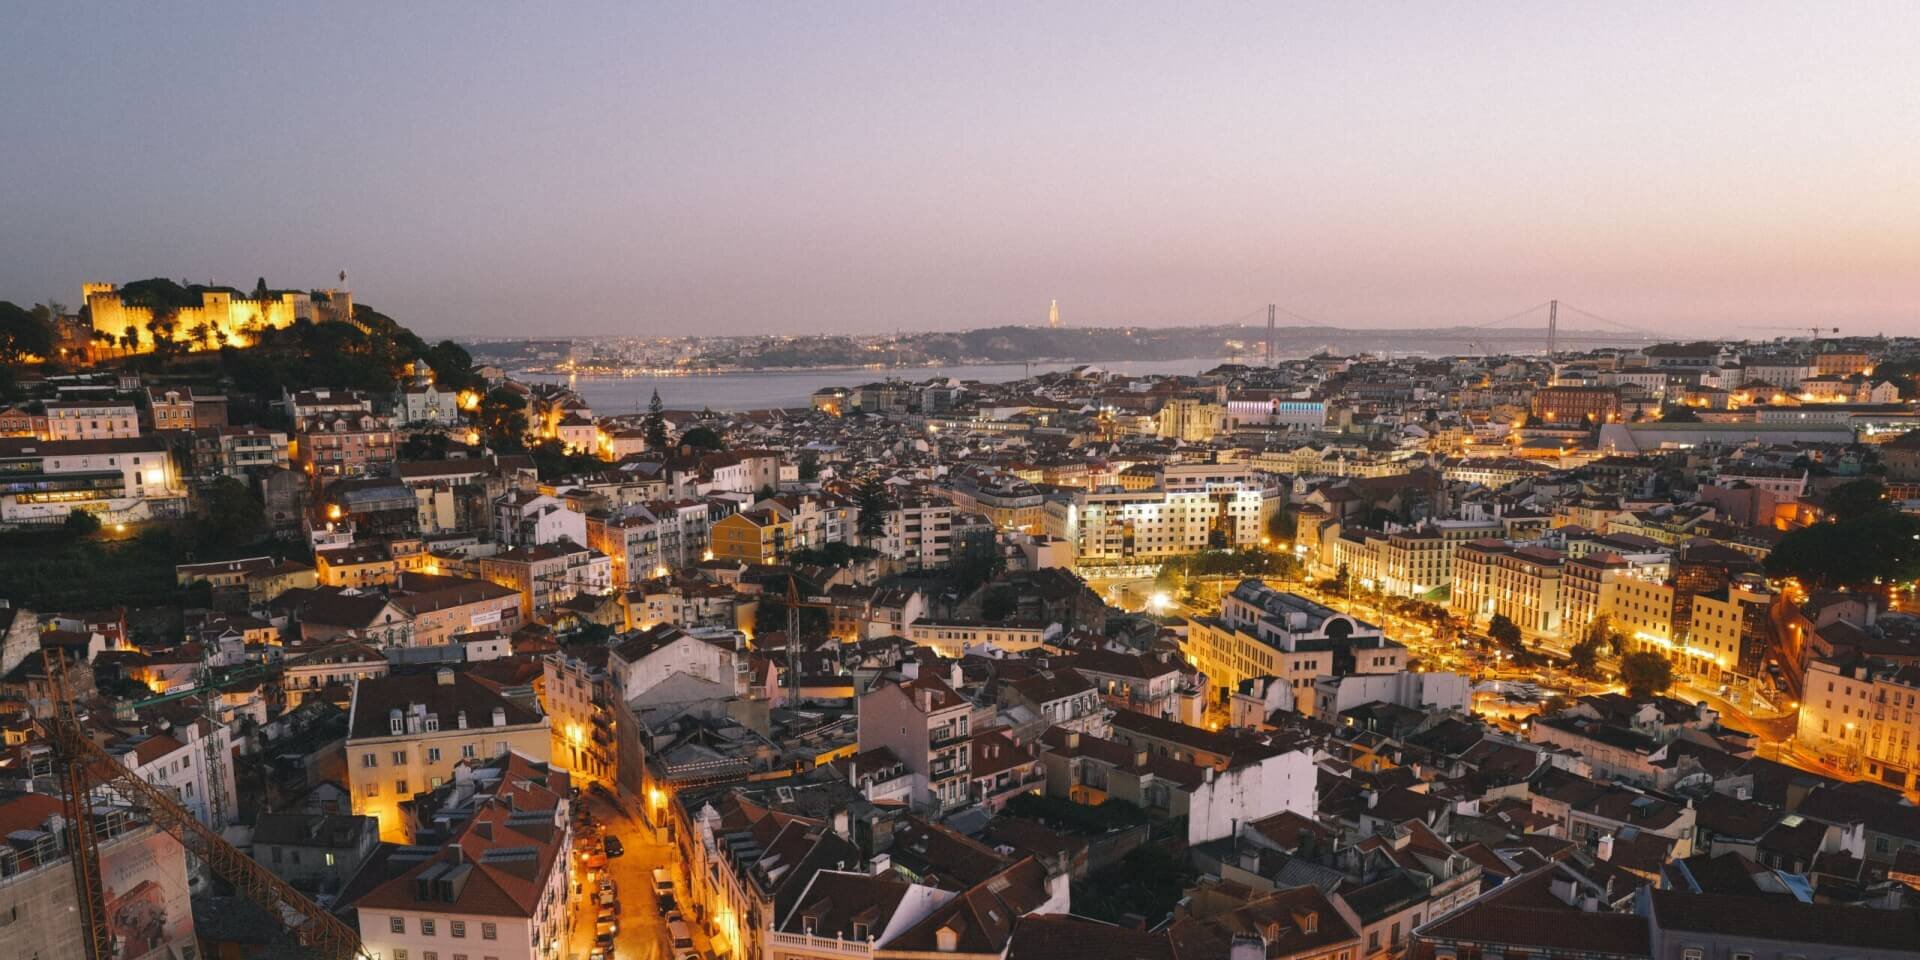 A landscape view of Lisbon city in the evening